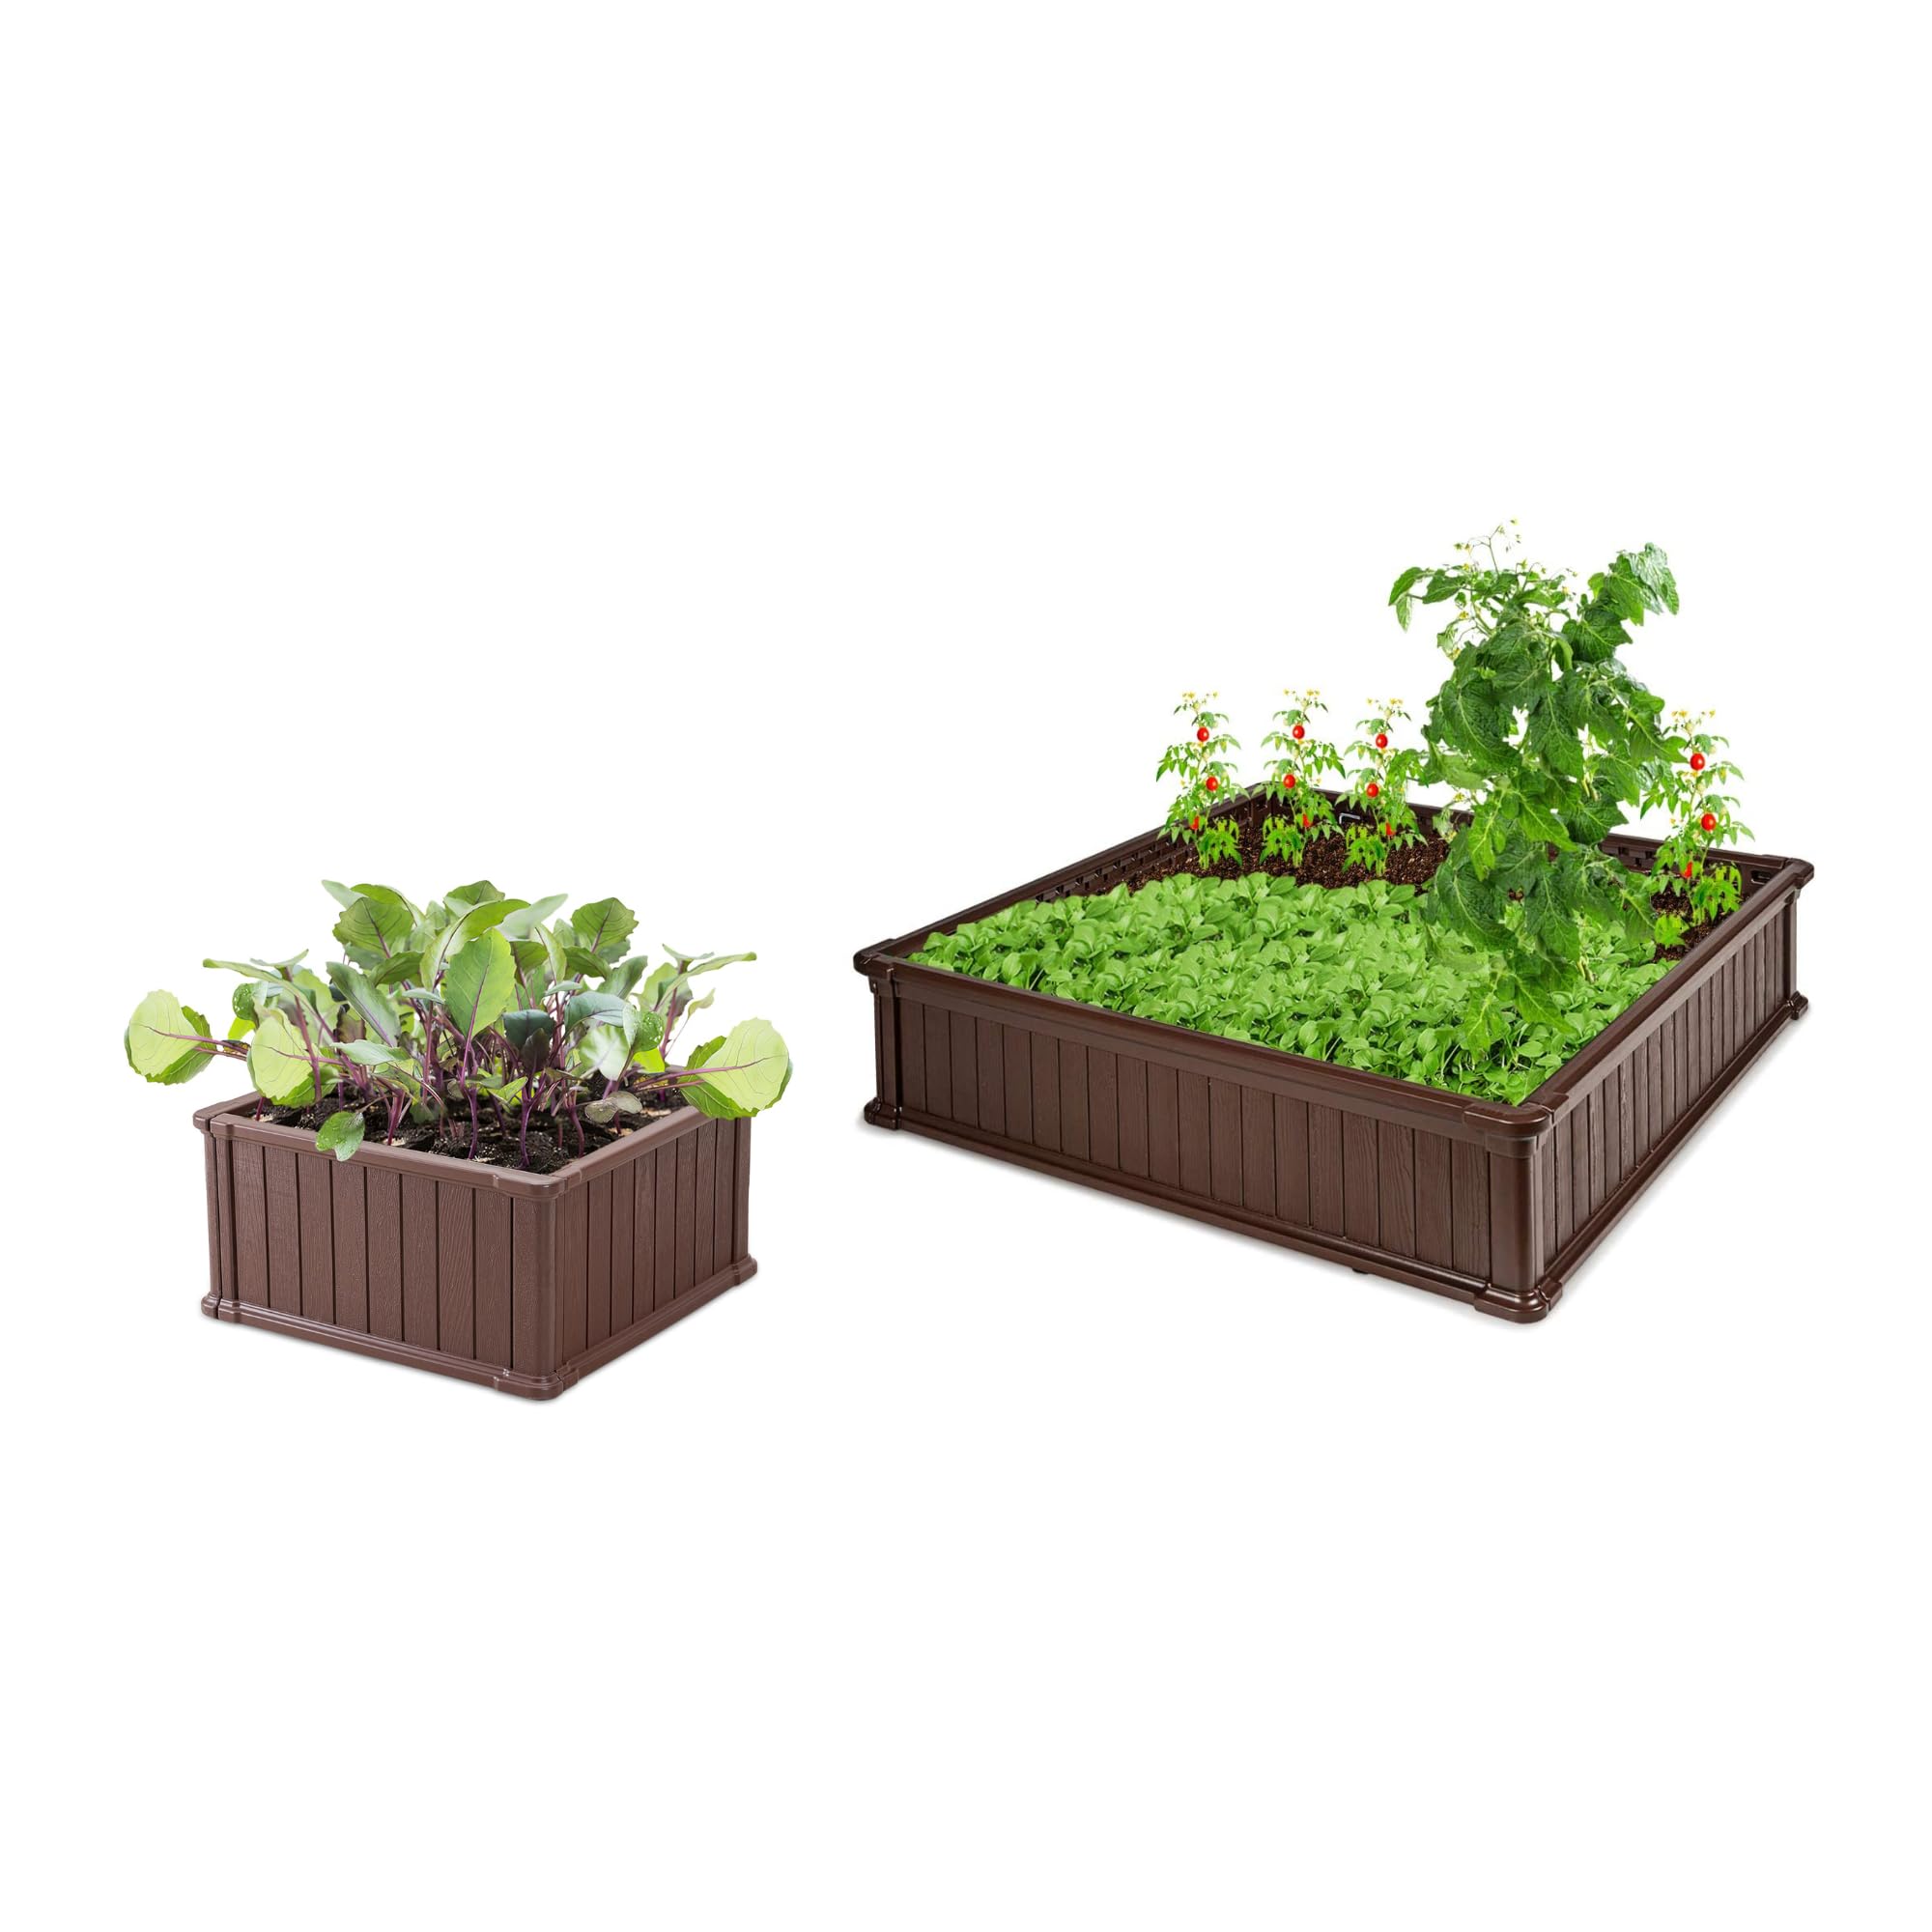 EHHLY 2PCS Raised Garden Beds Outdoor(Big & Little), Extra Thick Plastic Planter Box for Outdoor Plants, Square